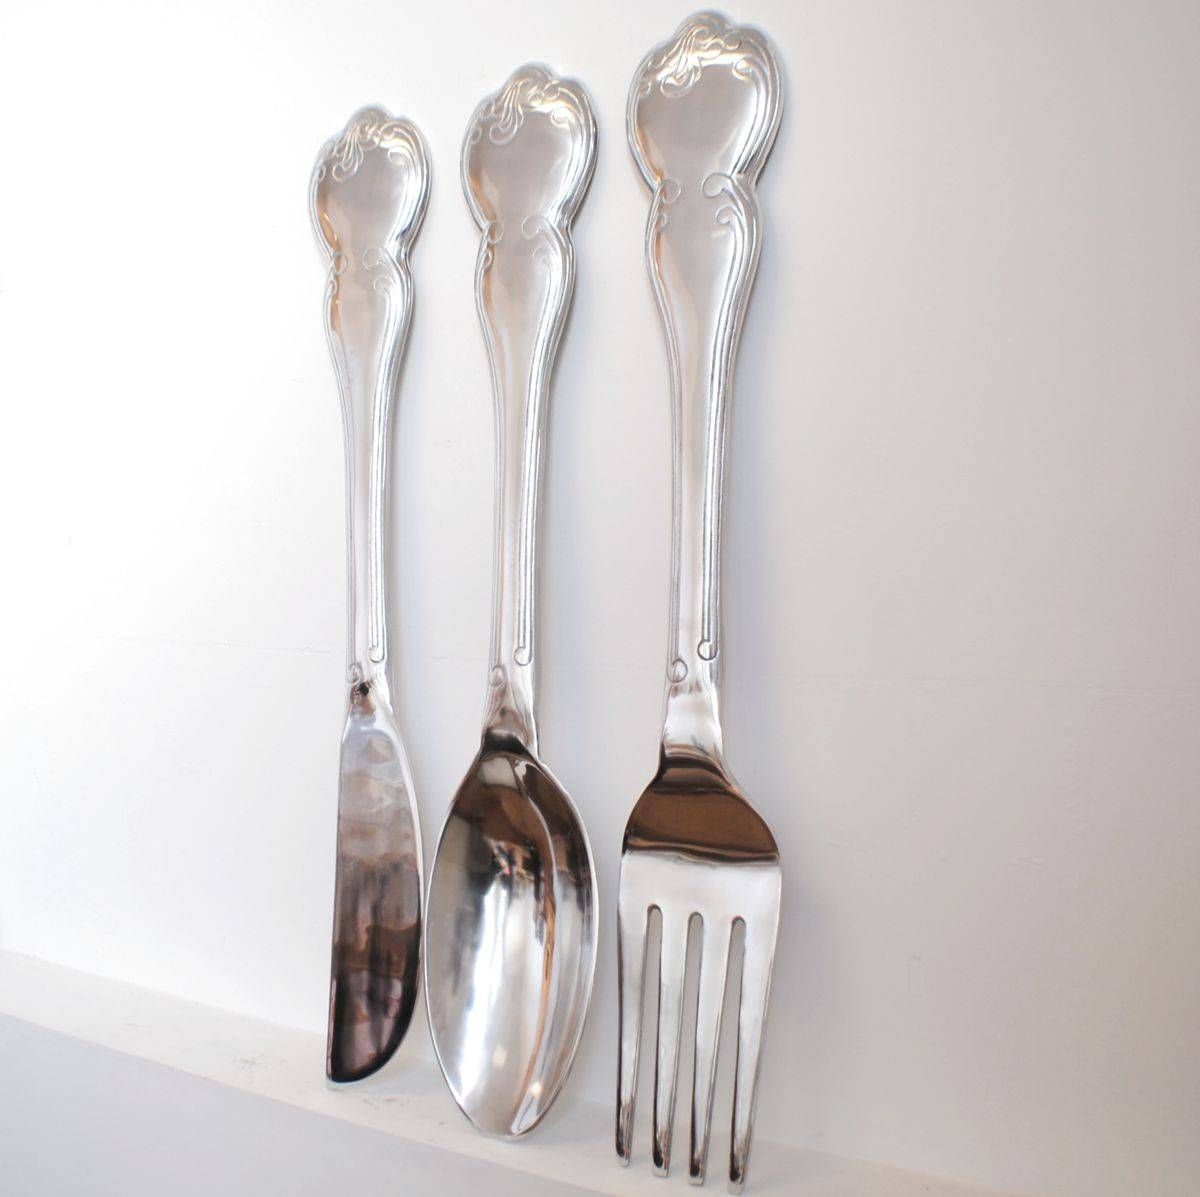 Mesmerizing Spoon Wall Decor Target Simple Decoration Big Spoon Regarding Current Giant Fork And Spoon Wall Art (Gallery 19 of 25)